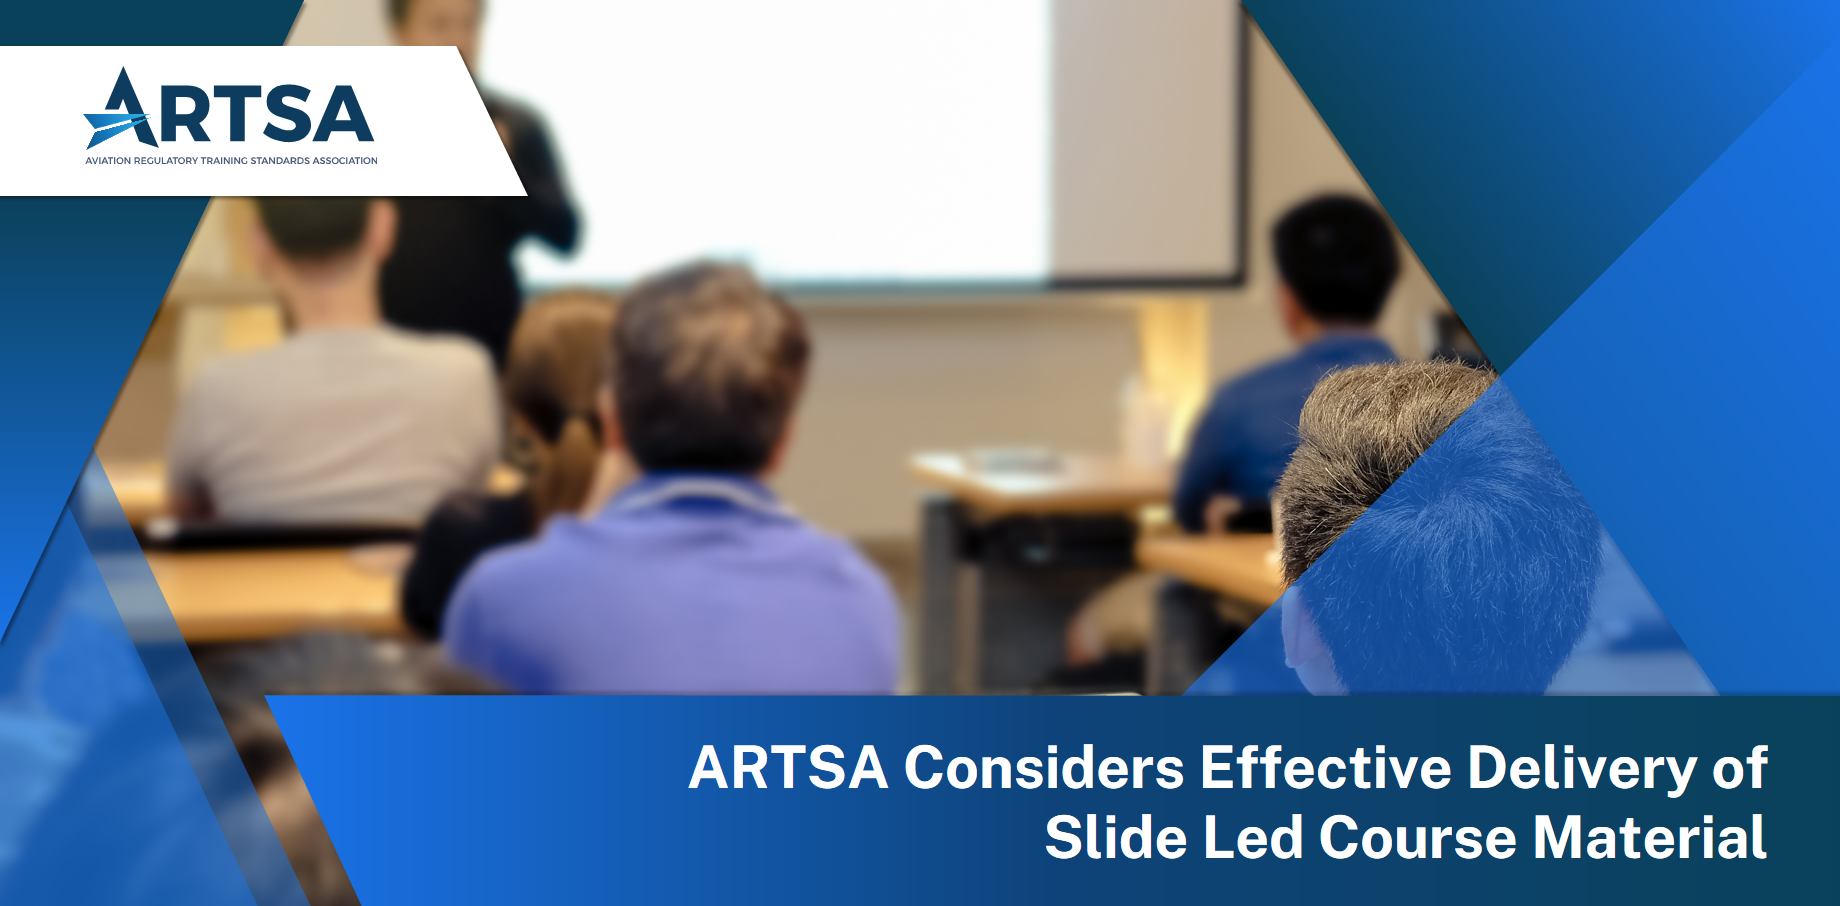 ARTSA Considers Effective Delivery of Slide Led Course Material